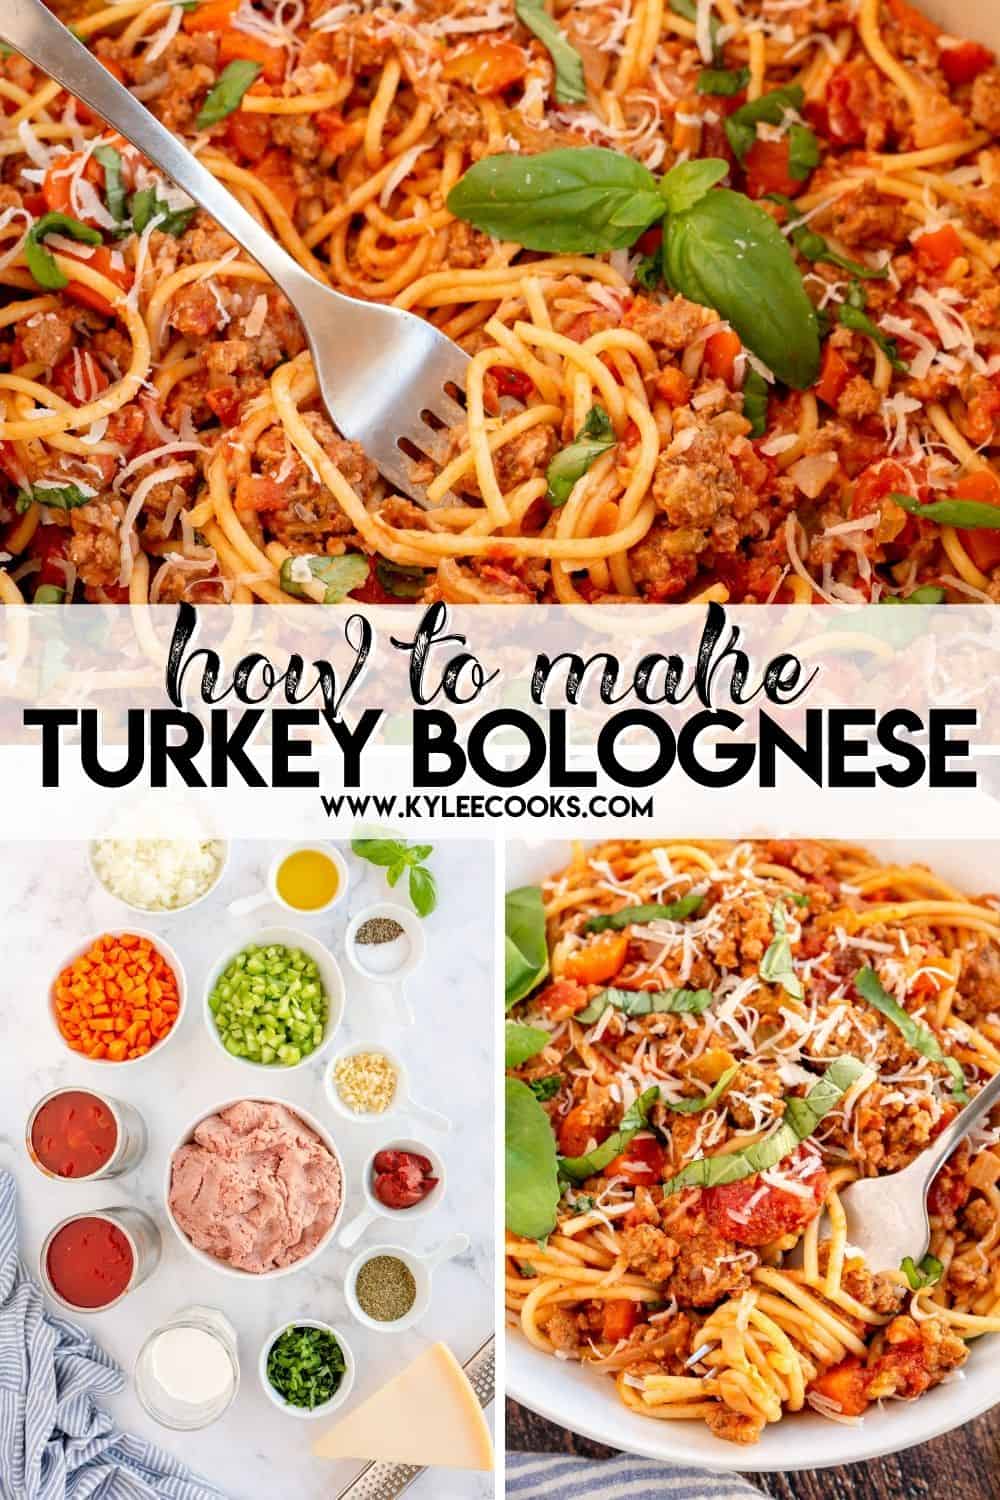 turkey bolognese with recipe title overlaid in text